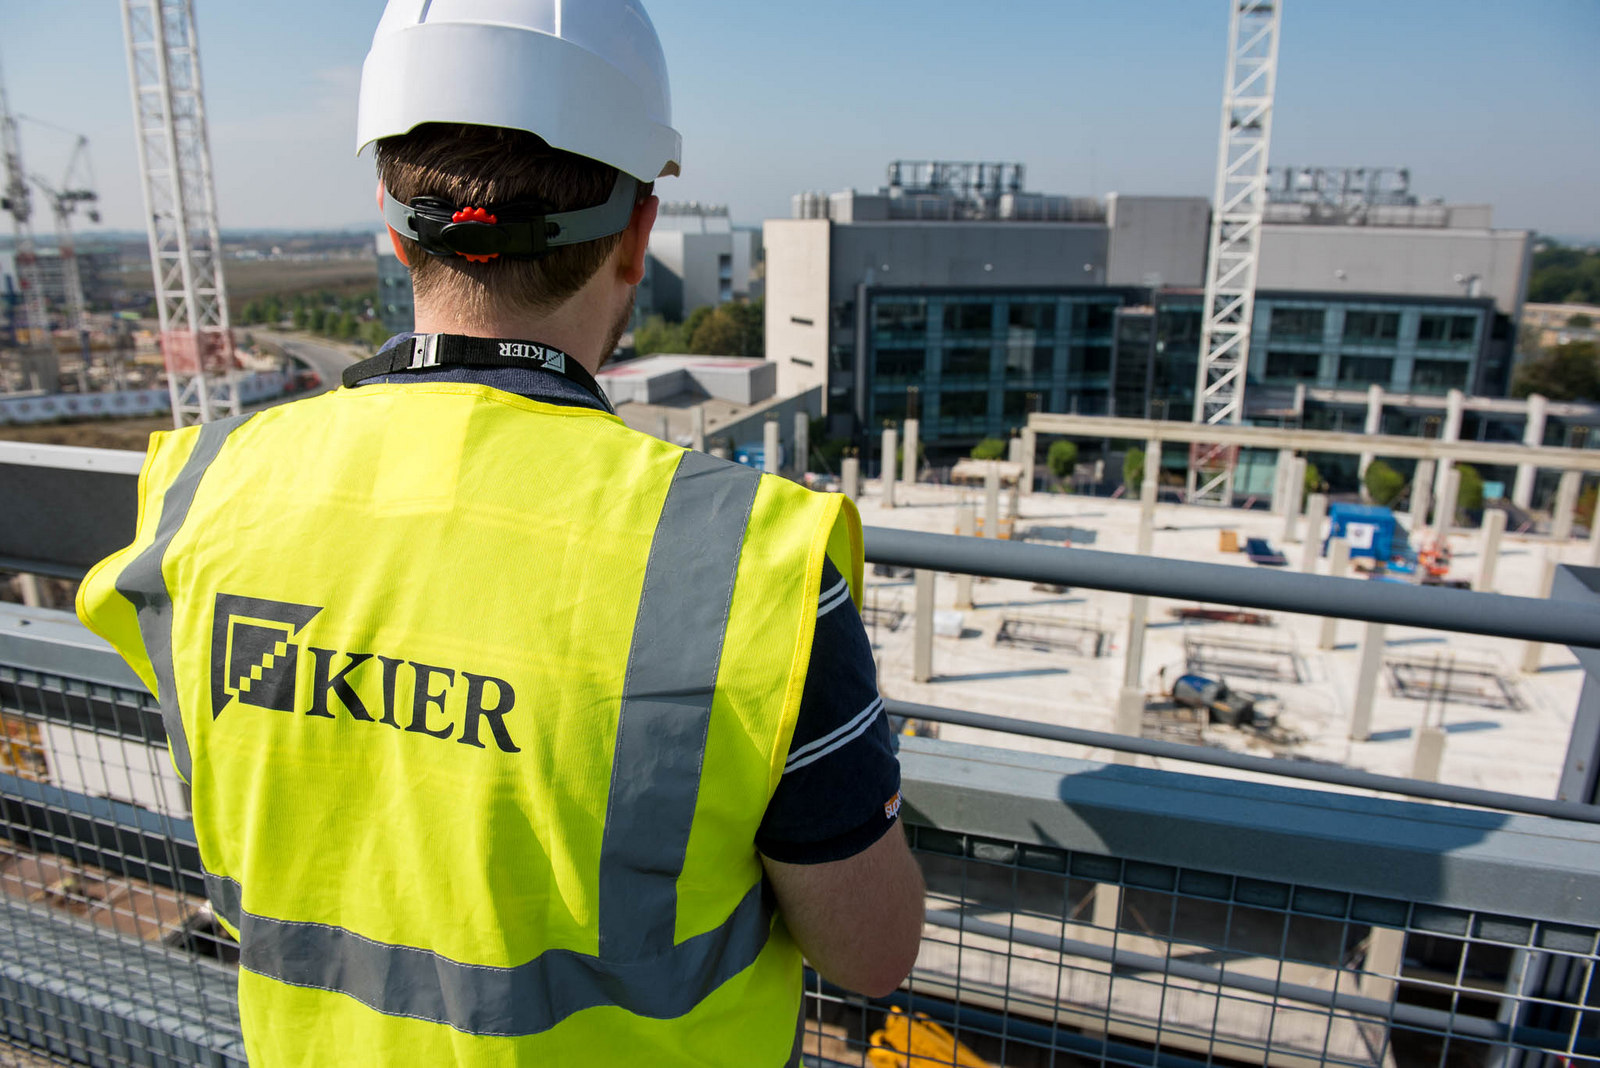 Future-proofing keeps Kier on track to meet expectations